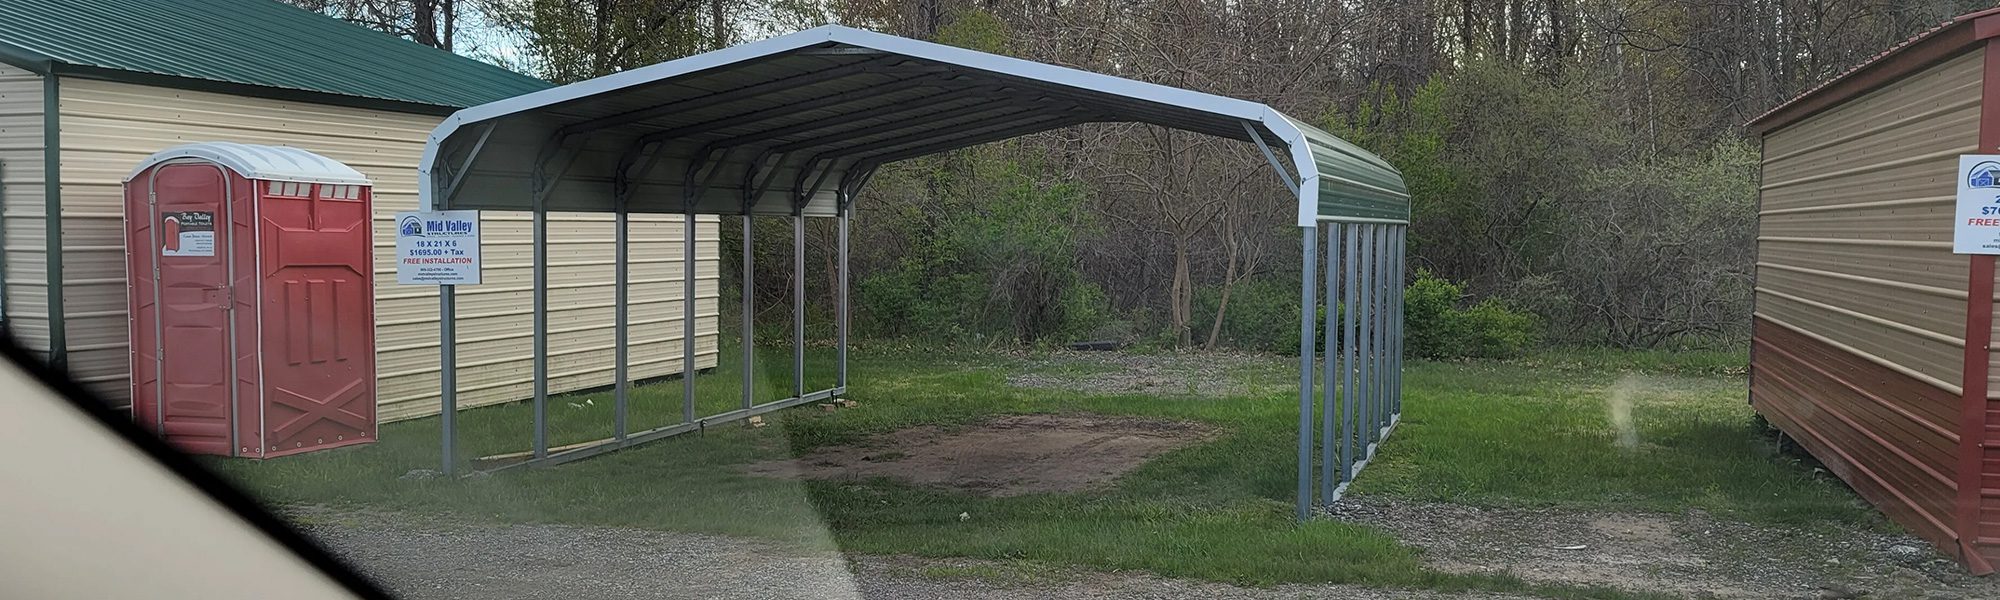 Carports For Sale  Mid Valley Structures, Mt Pleasant MI